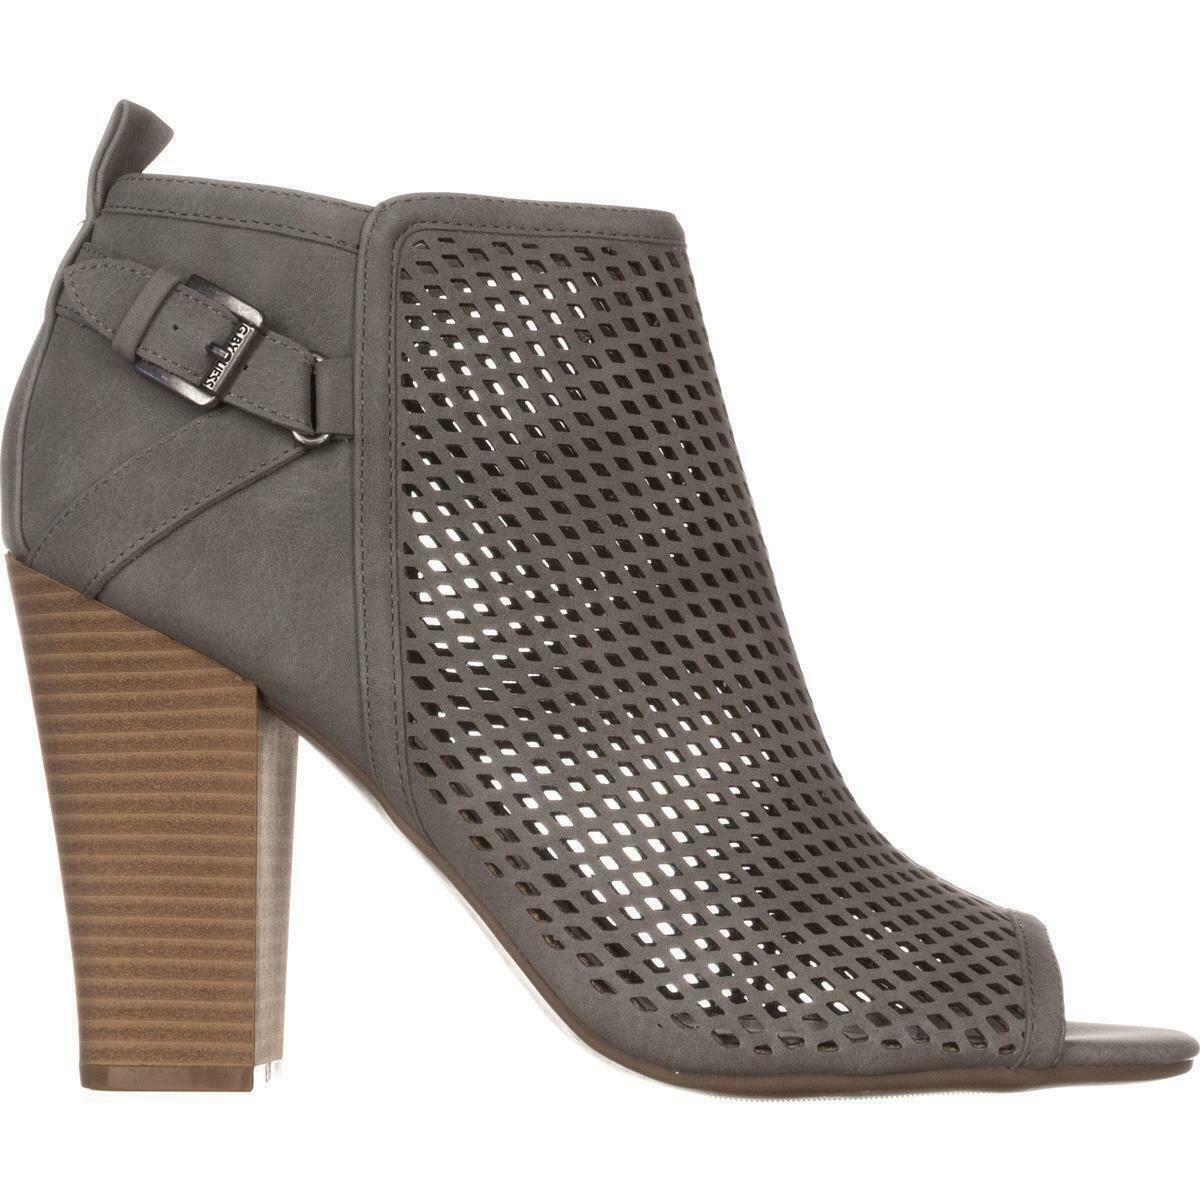 G by Guess Jerzy Peep Toe Ankle Booties, Dark Gray, 7 US - Boots